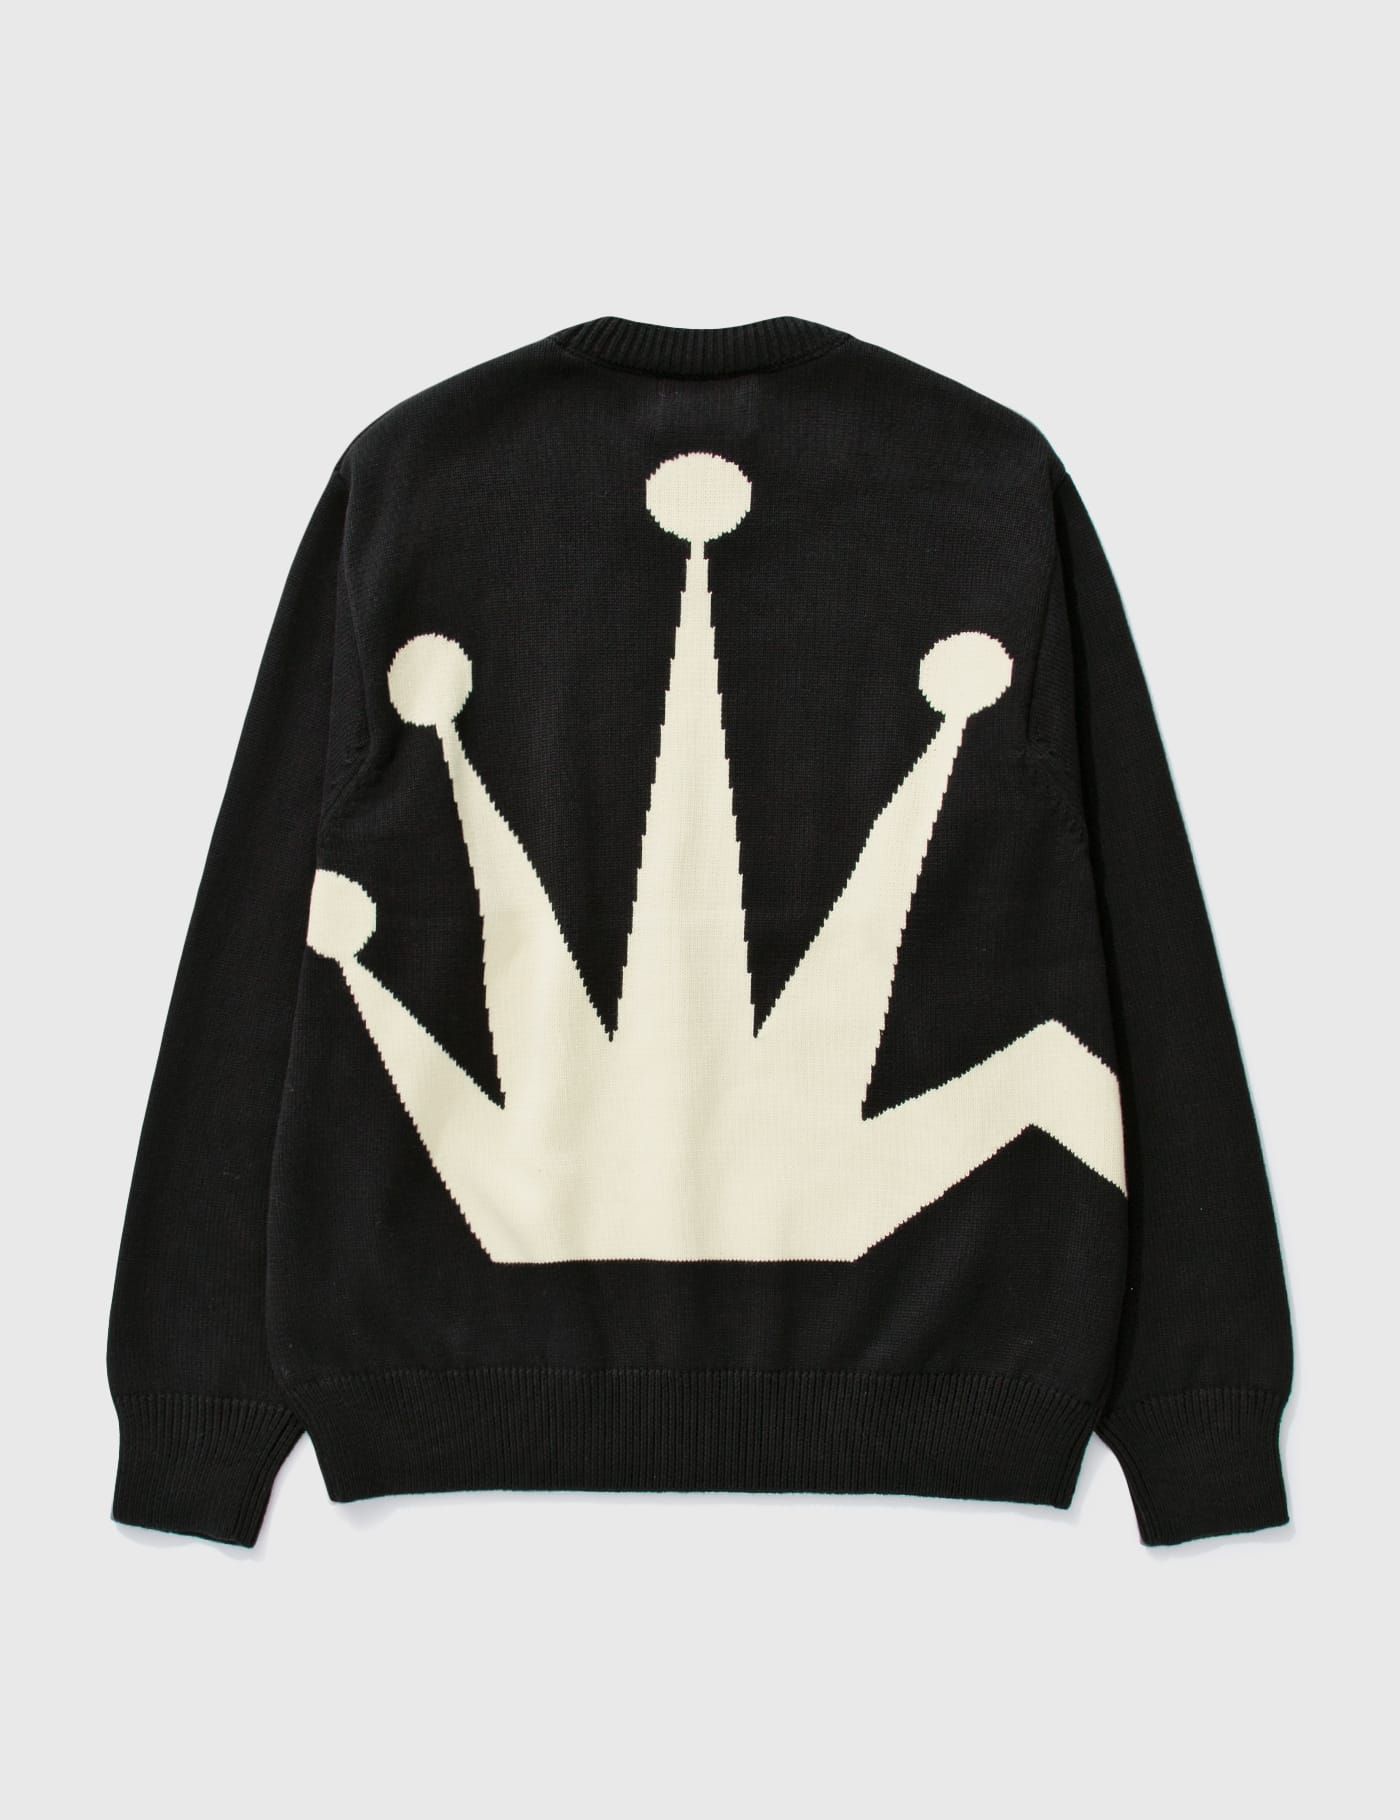 Stussy - Bent Crown Sweater | HBX - Globally Curated Fashion and Lifestyle  by Hypebeast